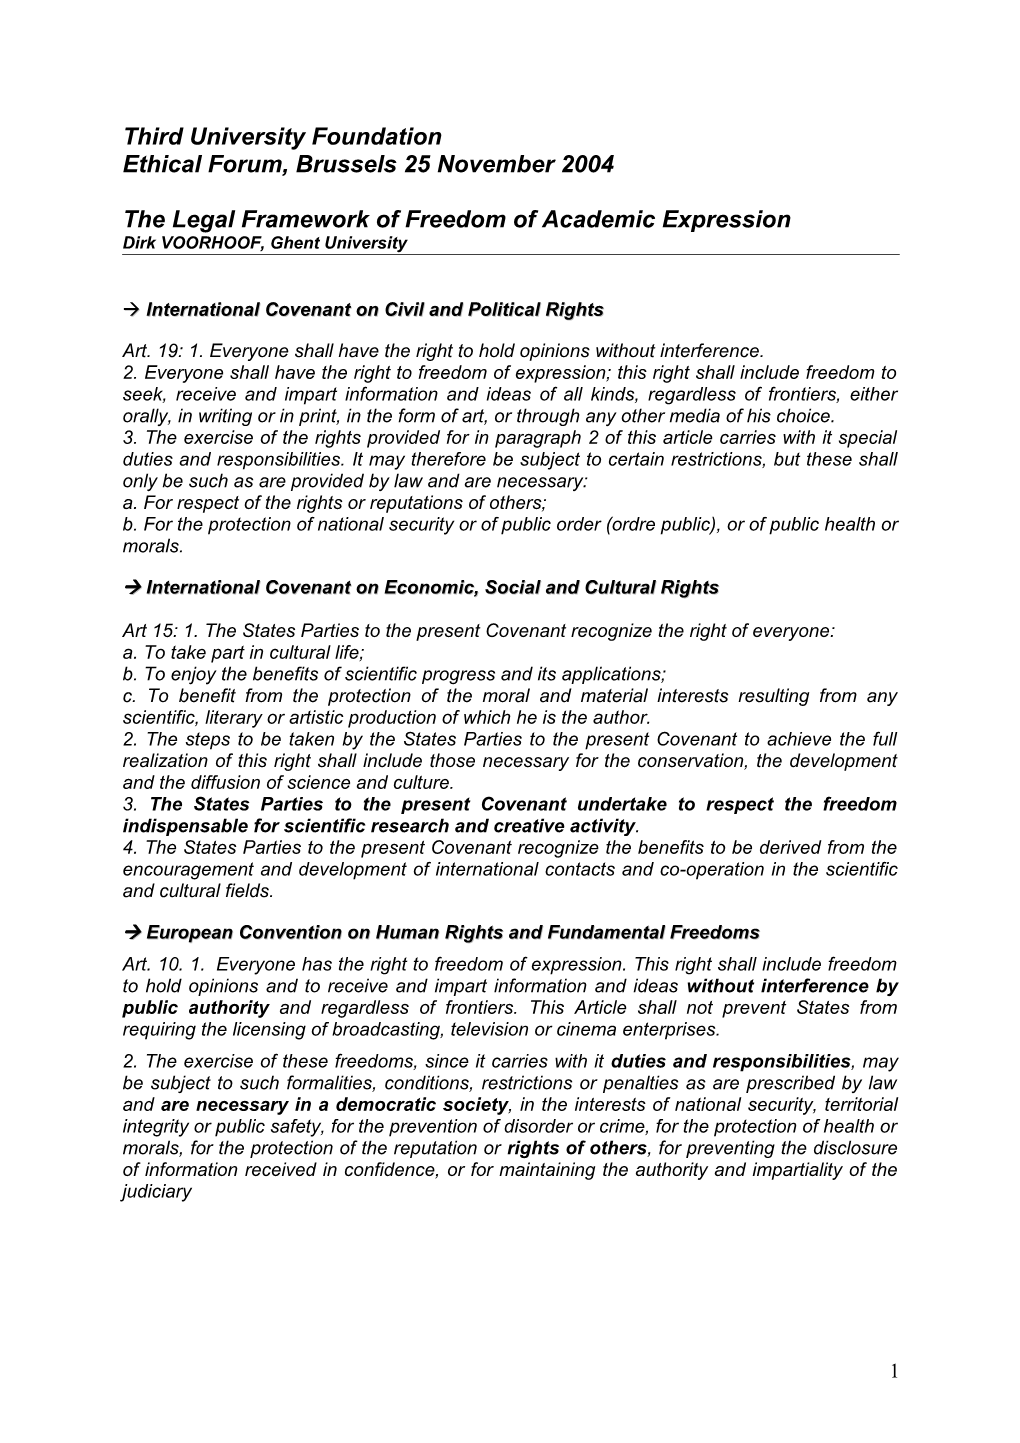 The Legal Framework of Freedom of Academic Expression